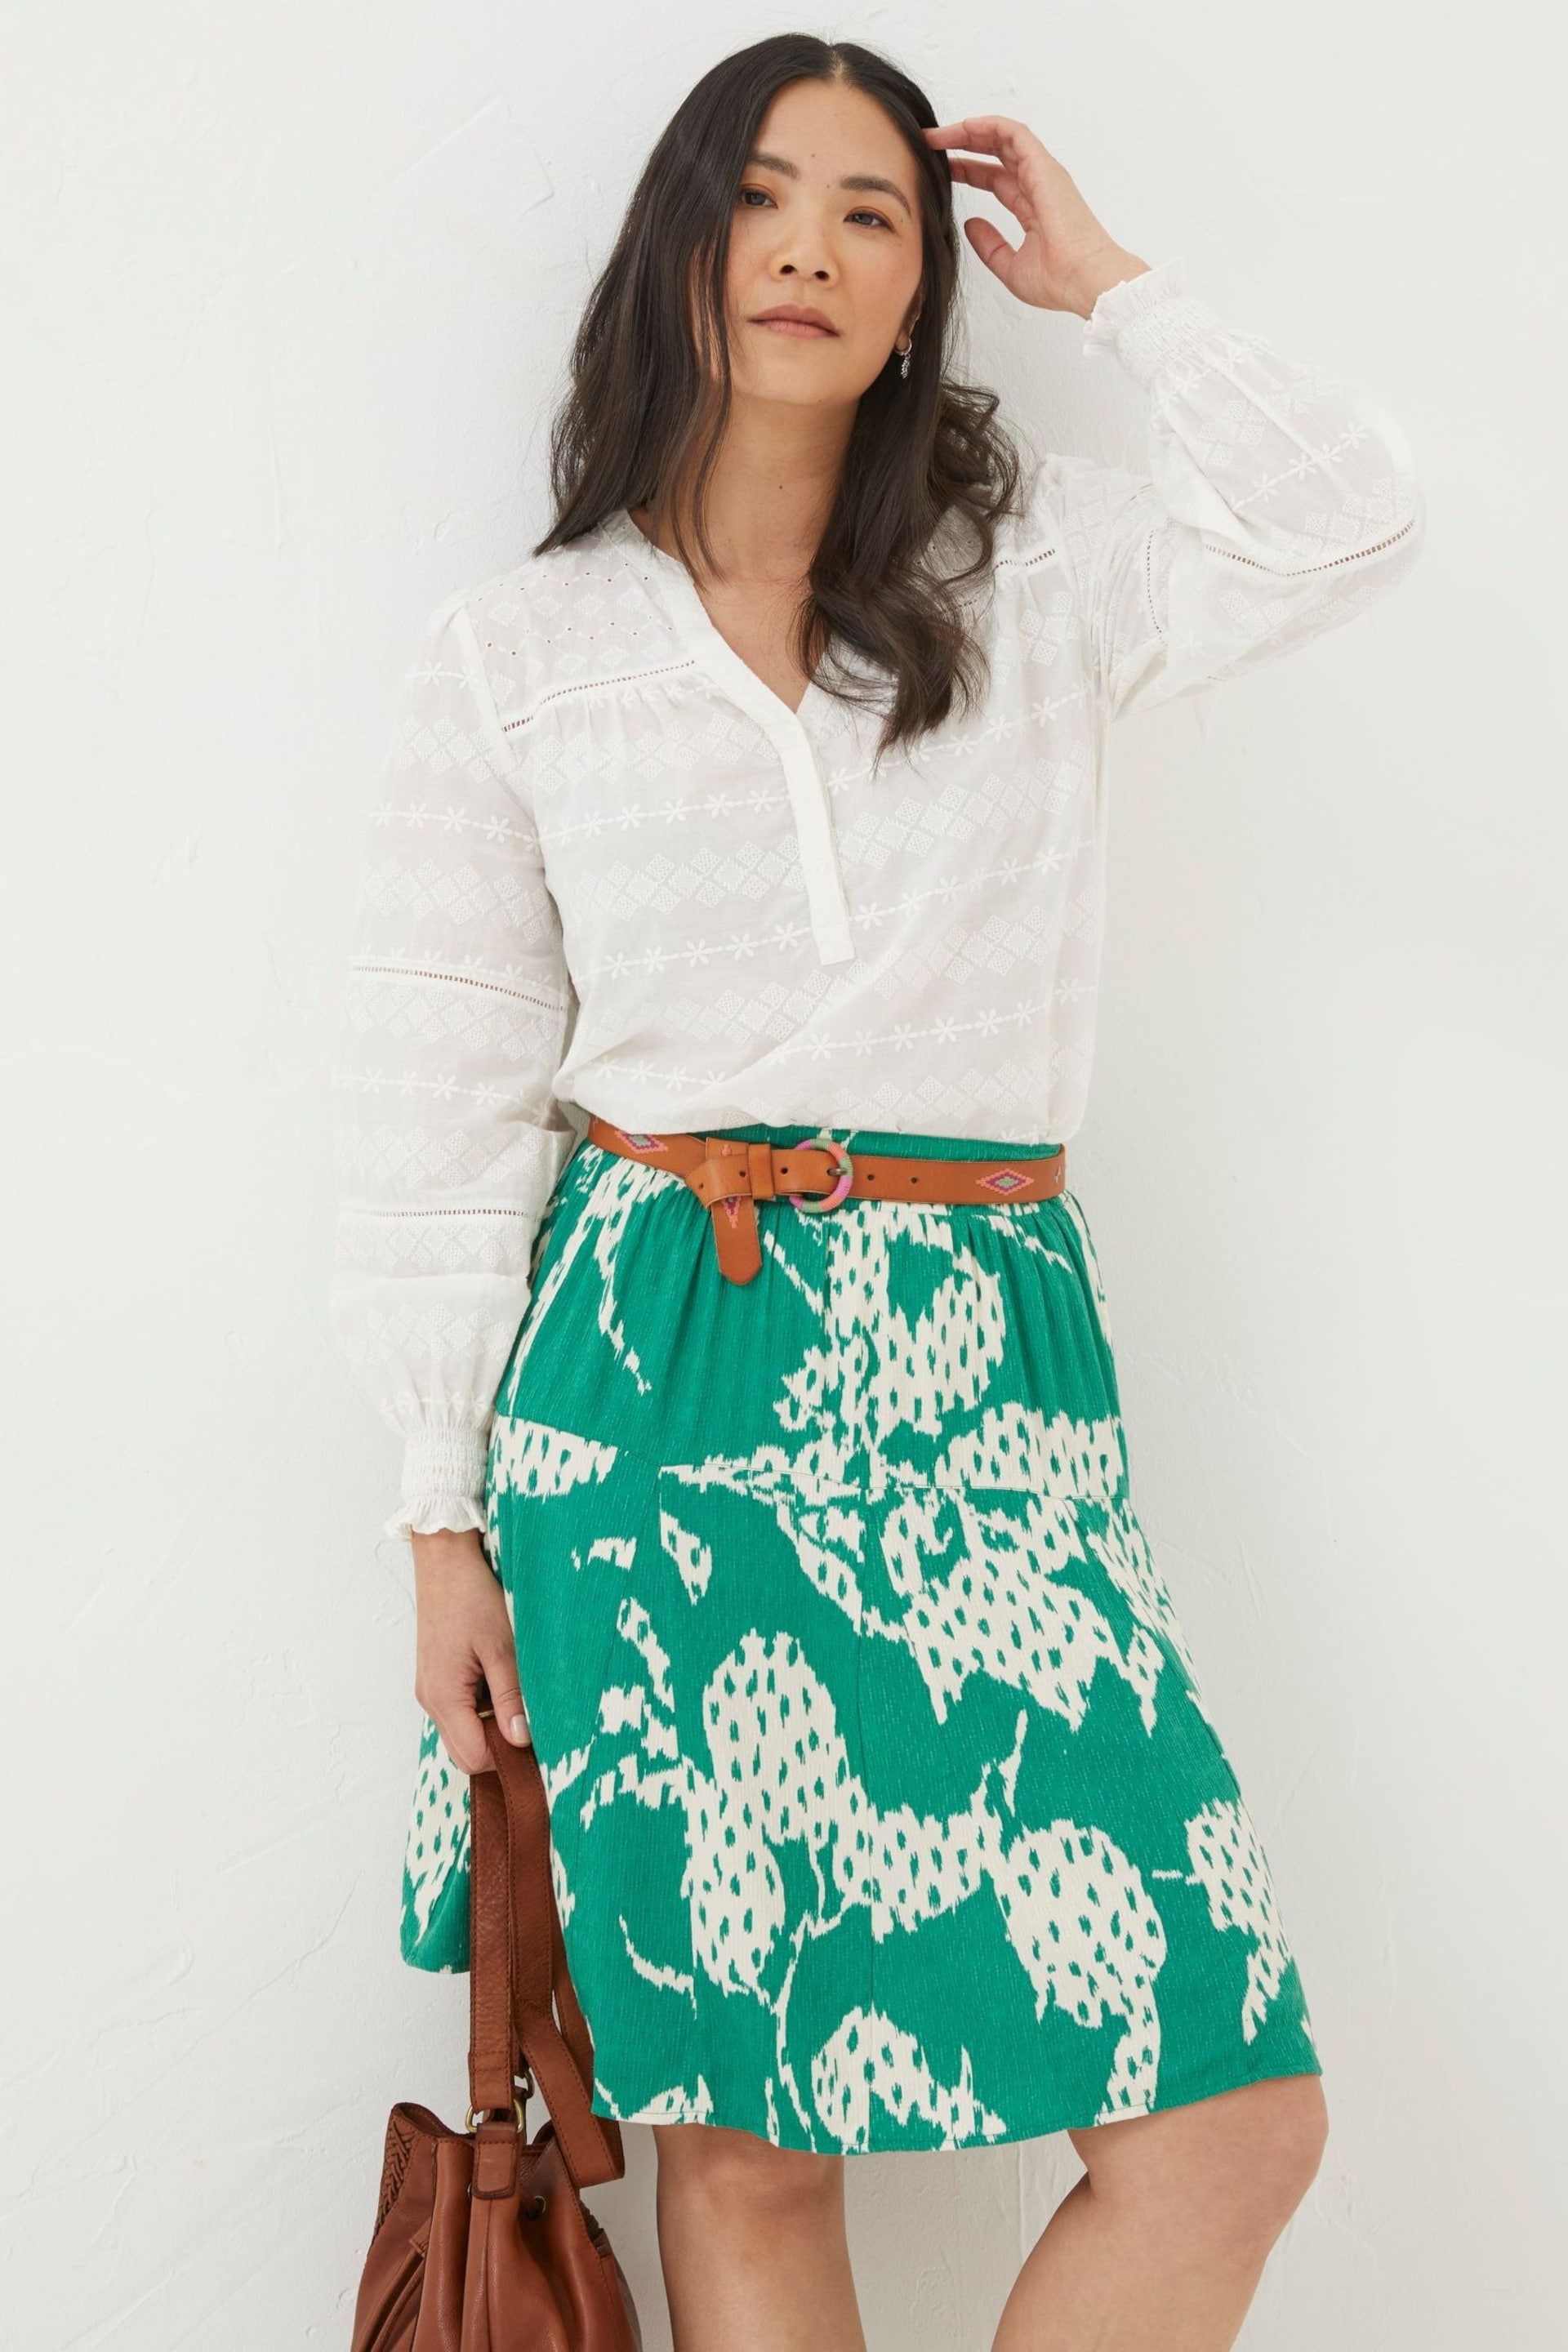 FatFace Green Textured Leaves Skirt - Image 1 of 5